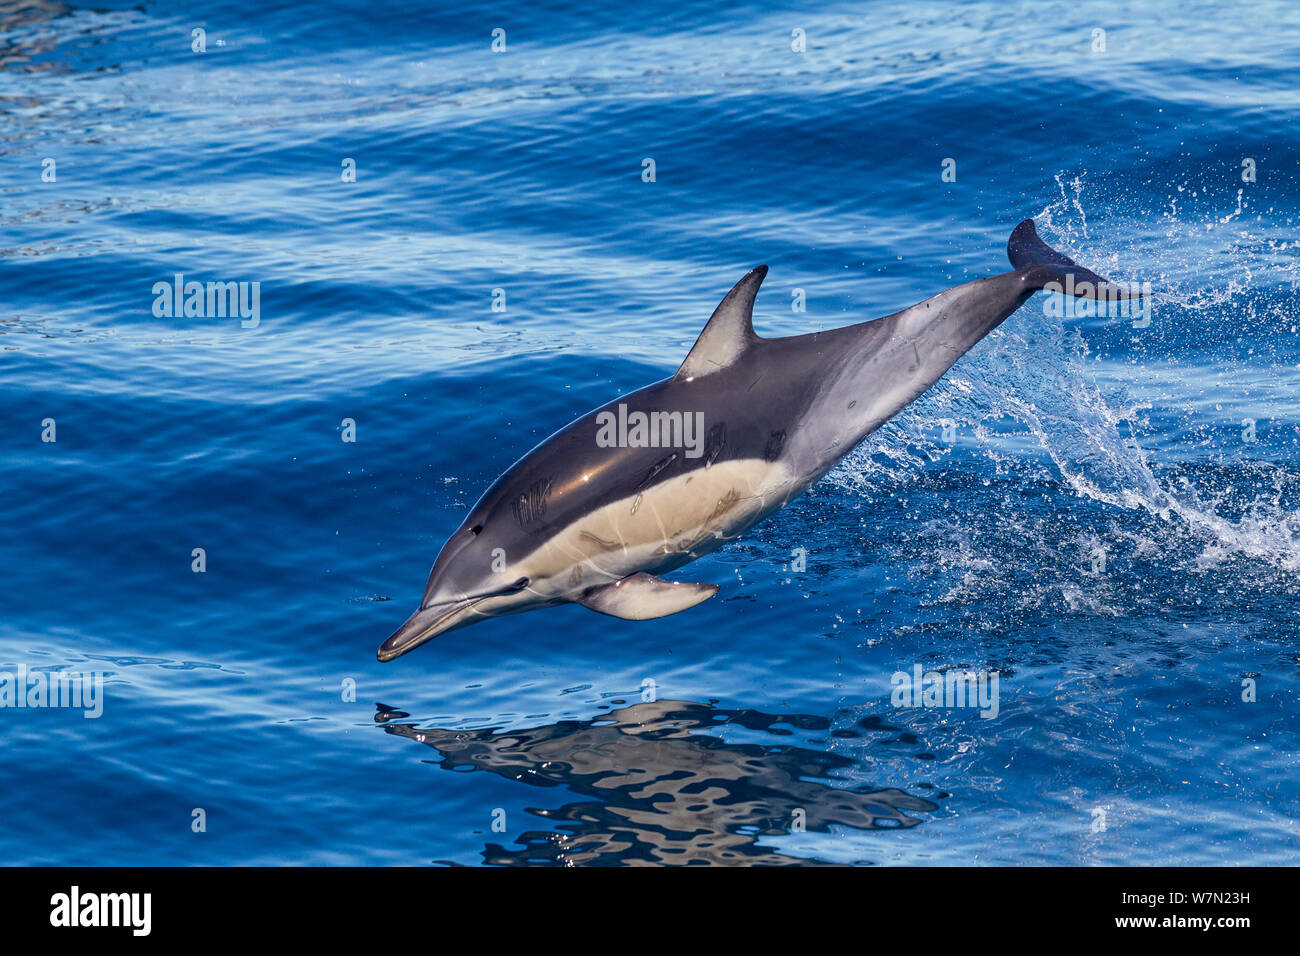 Short-beaked common dolphin (Delphinus delphis) breaking the surface and leaping from the water. Off Napier, Hawkes Bay, New Zealand. Stock Photo